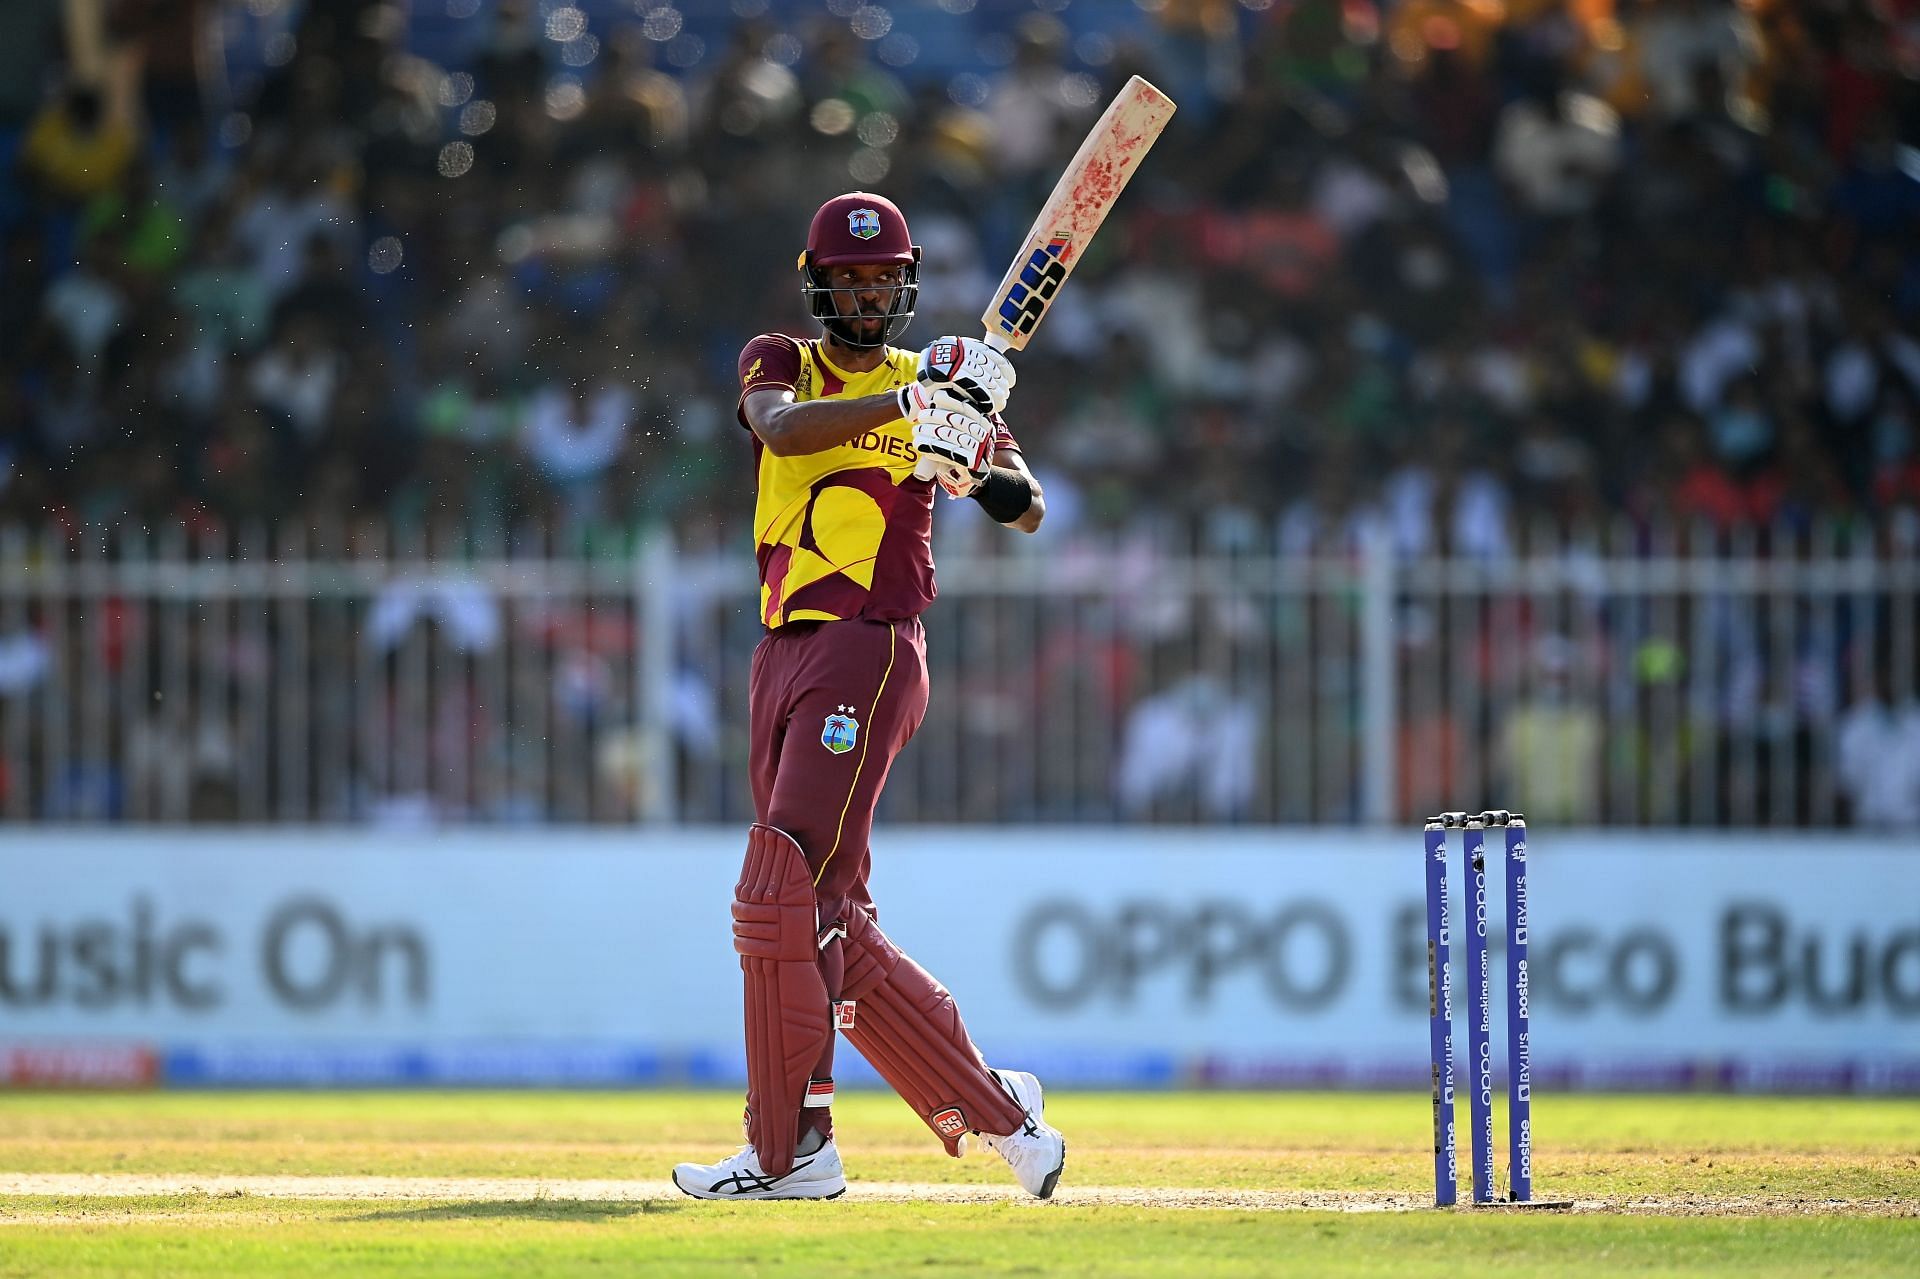 Roston Chase impressed fans during the series against India